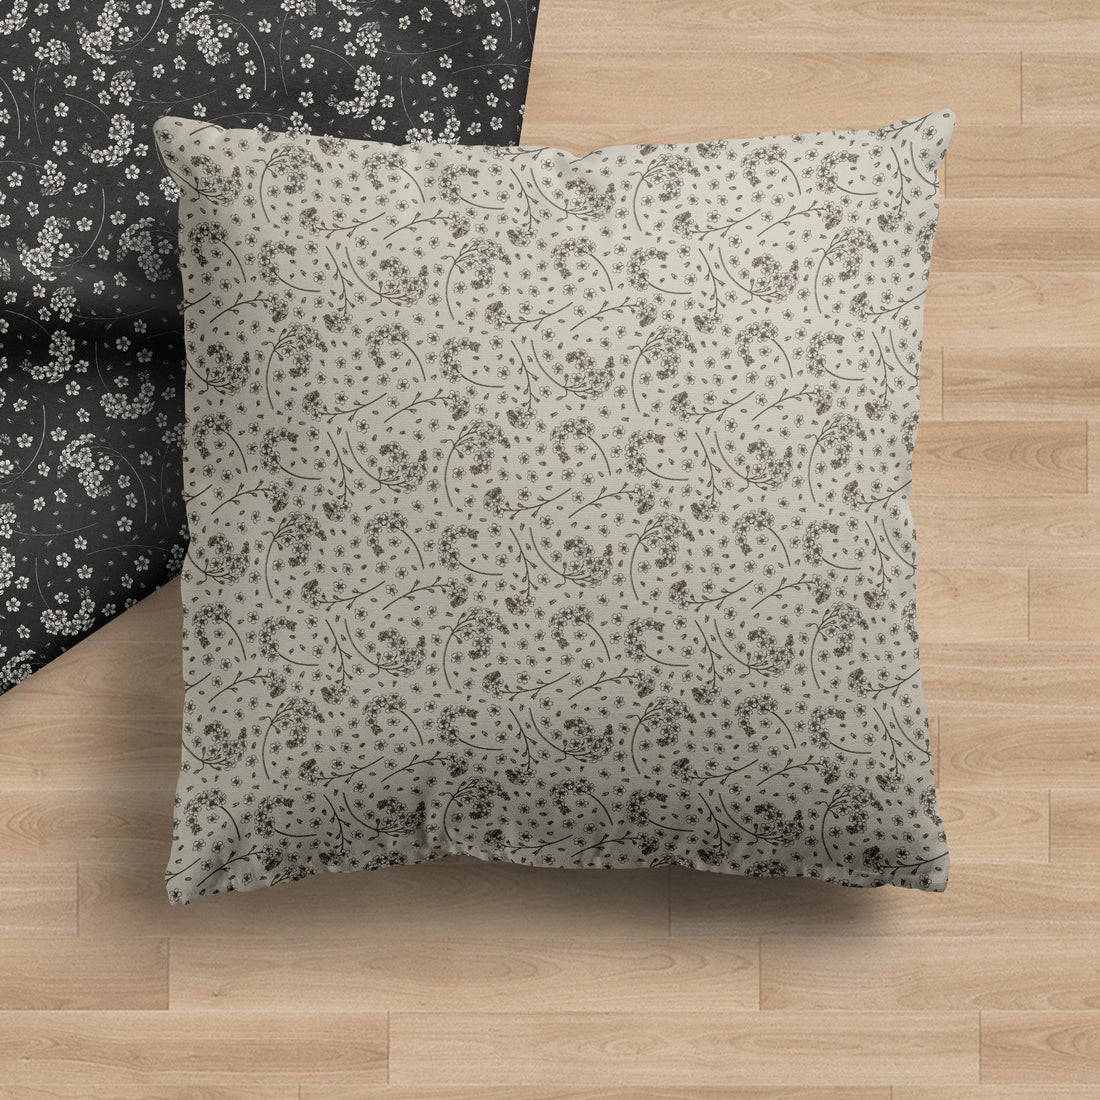 Light Floral Dream Pillow Cover II